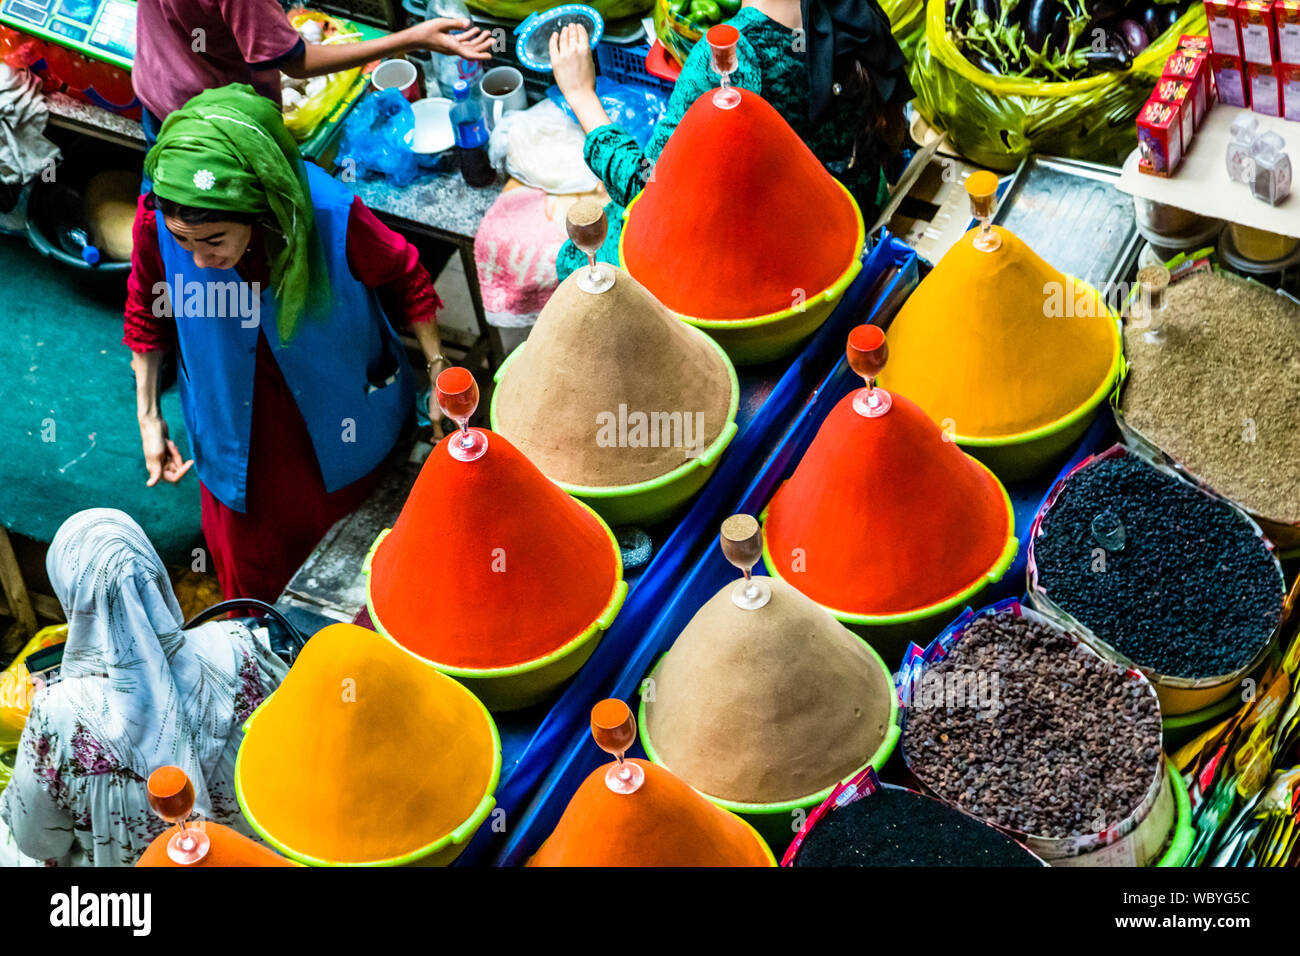 Colorful spice cones inside Main Market Hall in Dushanbe,  Capital City of Tajikistan Stock Photo